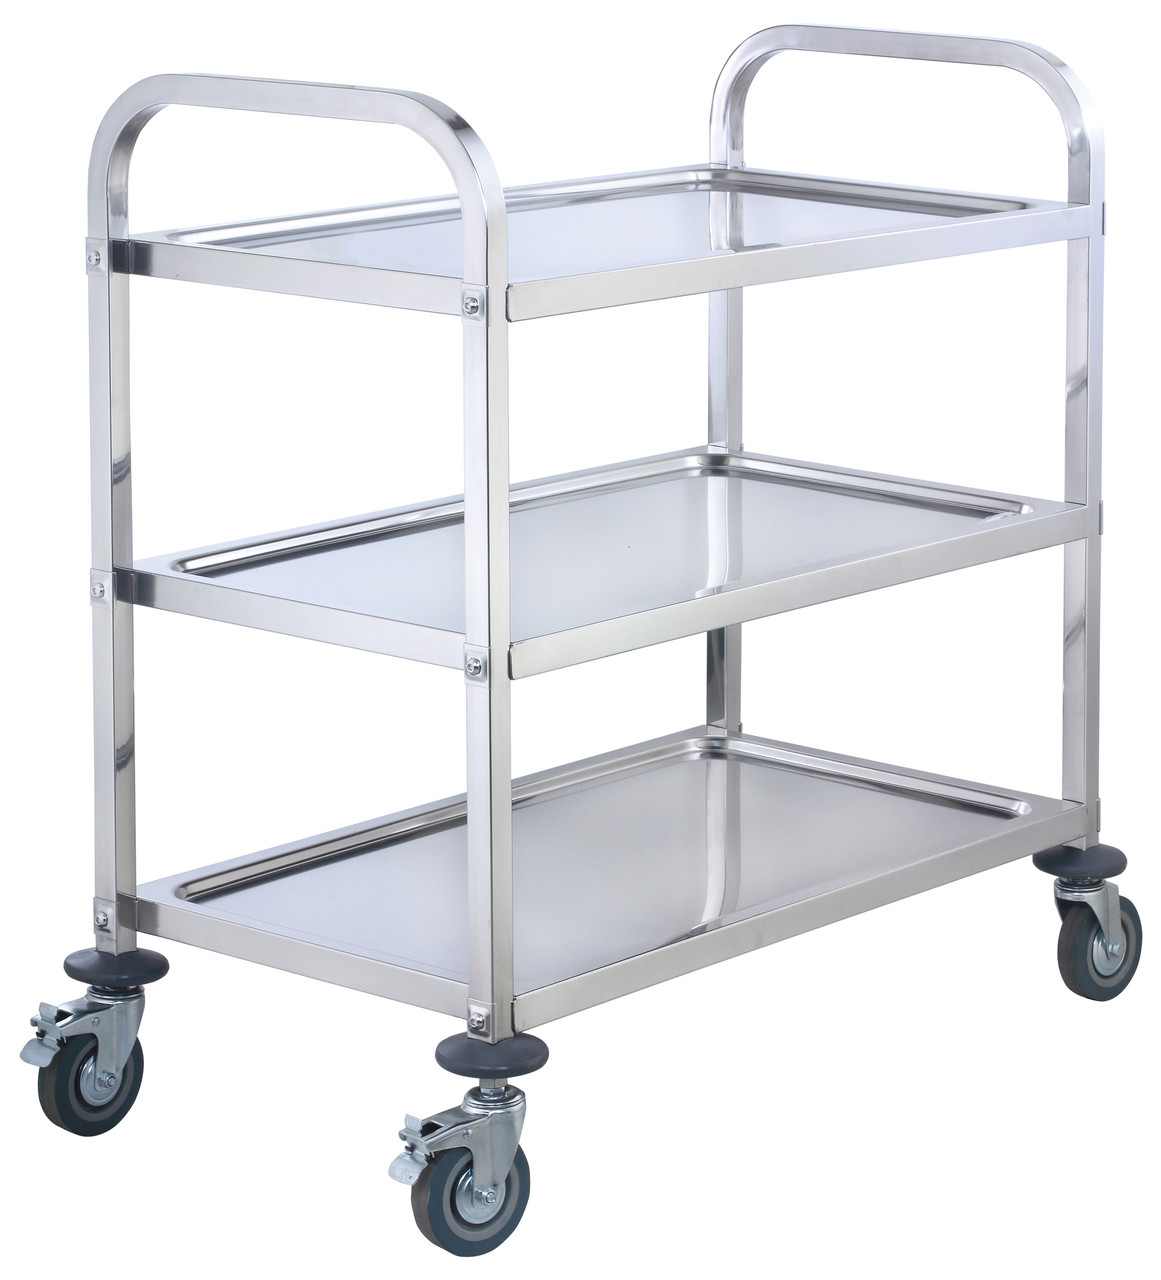 Winco Utility Trolley, 3 Tiers, Medium Size, Stainless Steel,33.5"